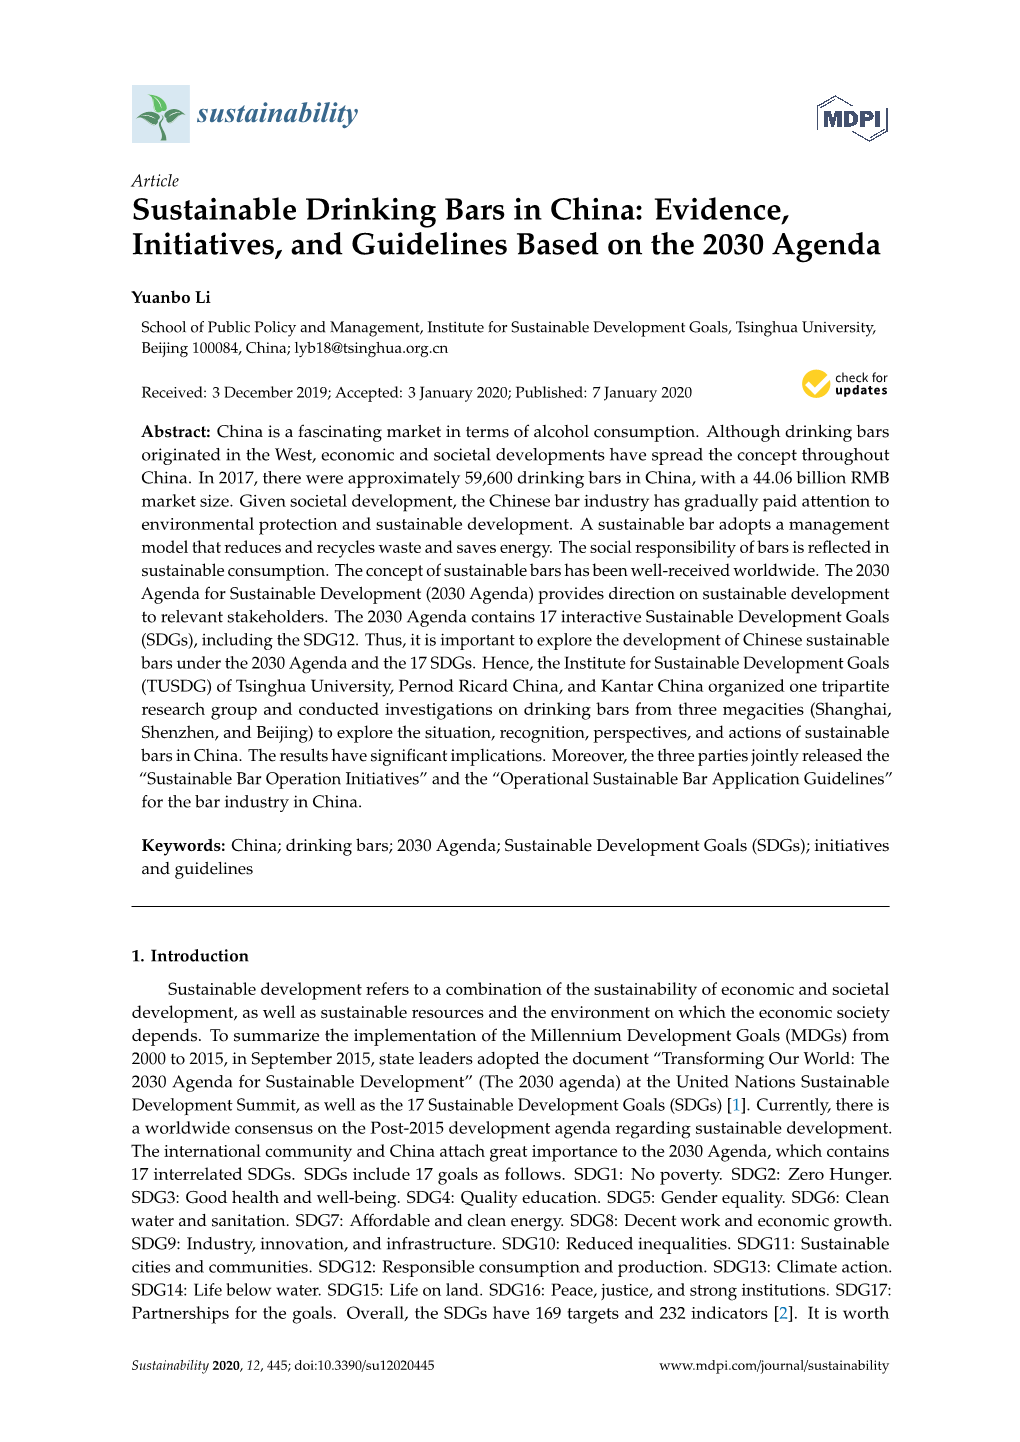 Sustainable Drinking Bars in China: Evidence, Initiatives, and Guidelines Based on the 2030 Agenda